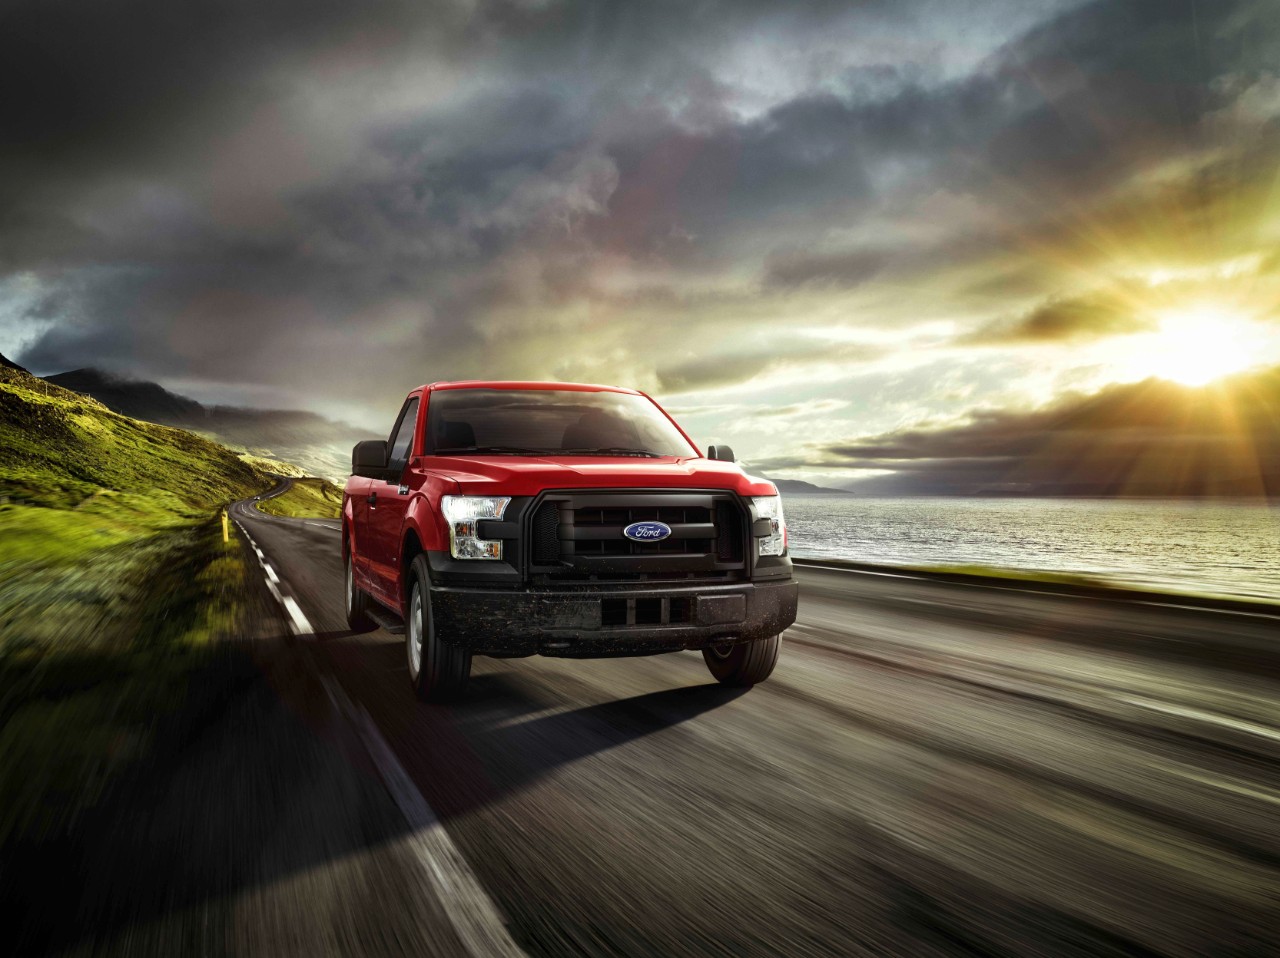 2015 Ford F-150 Honored for Innovation in Lightweighting with Altair Enlighten Award